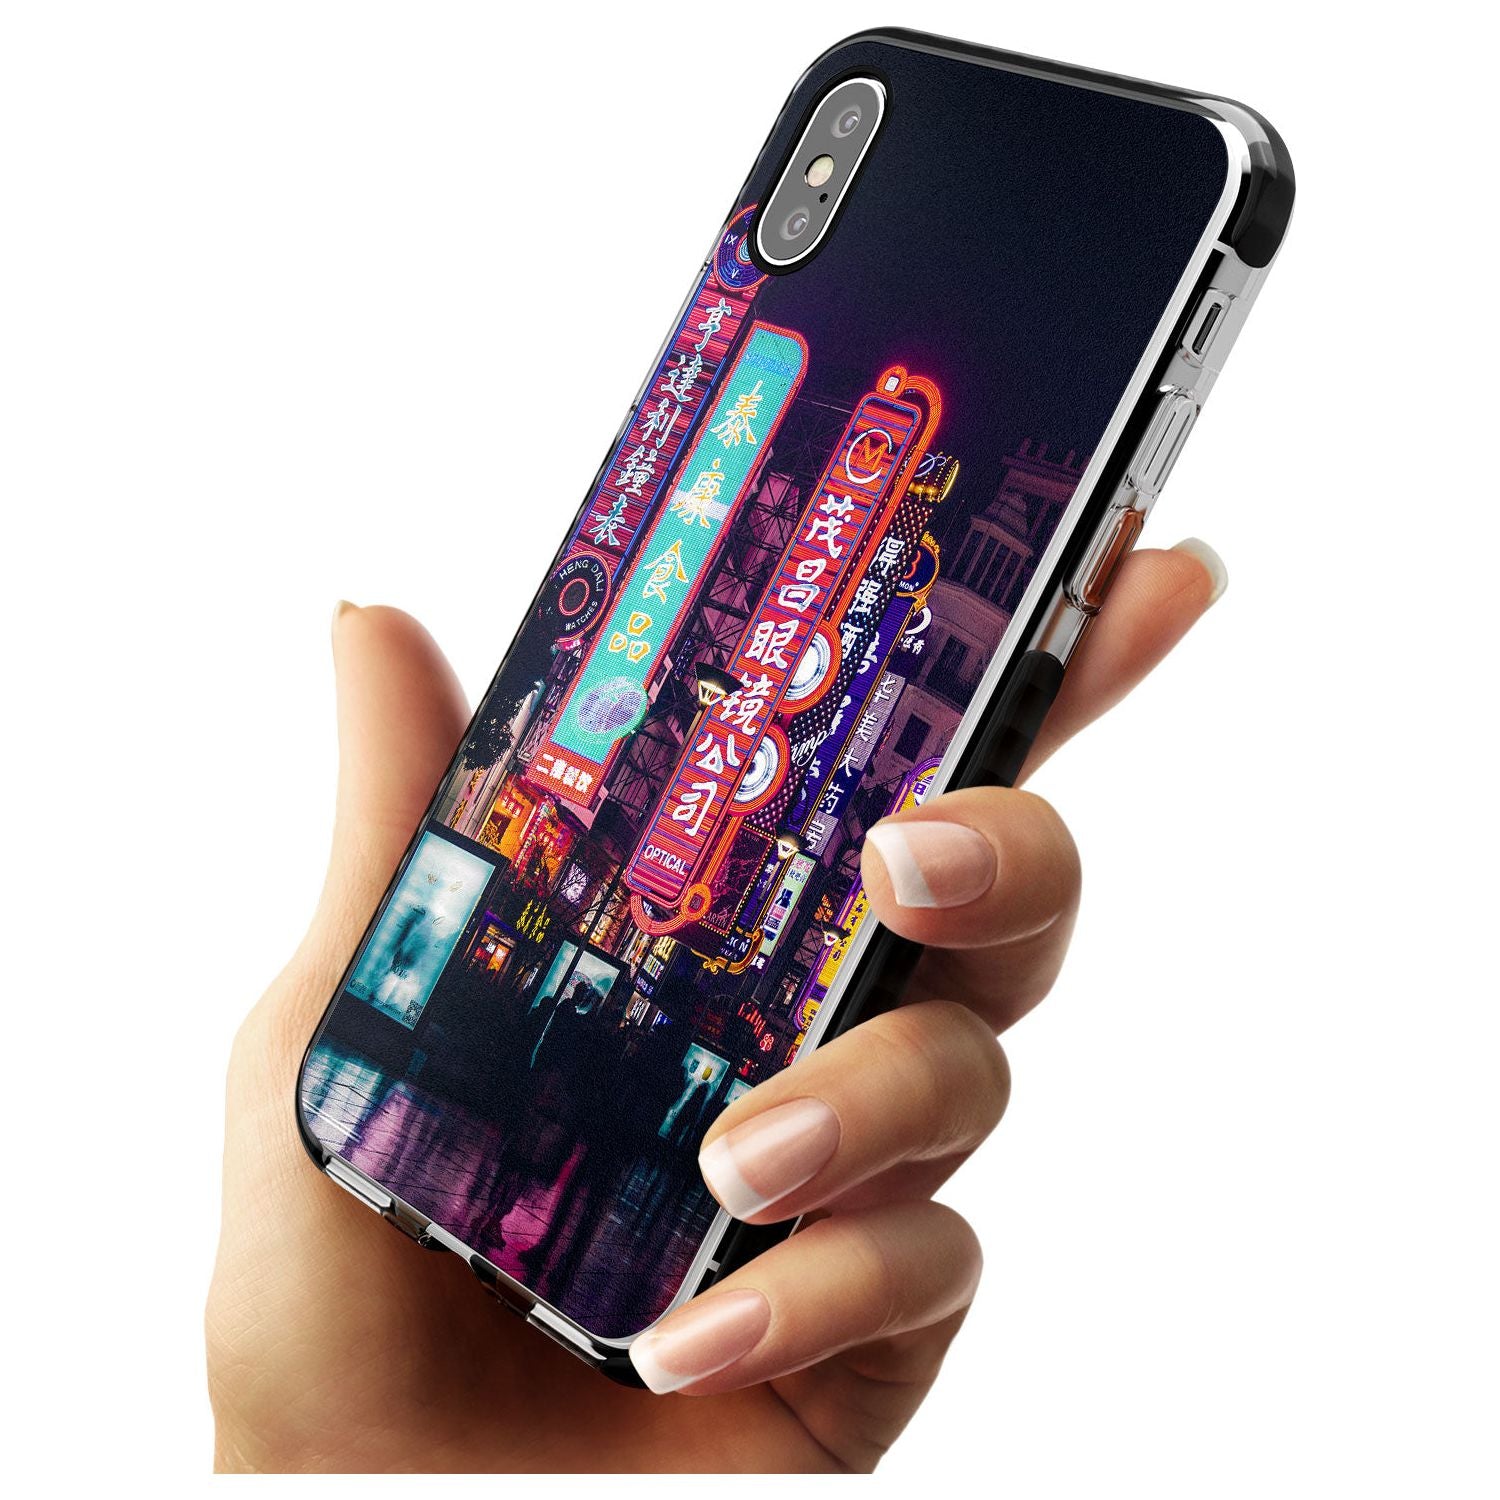 Busy Street - Neon Cities Photographs Black Impact Phone Case for iPhone X XS Max XR